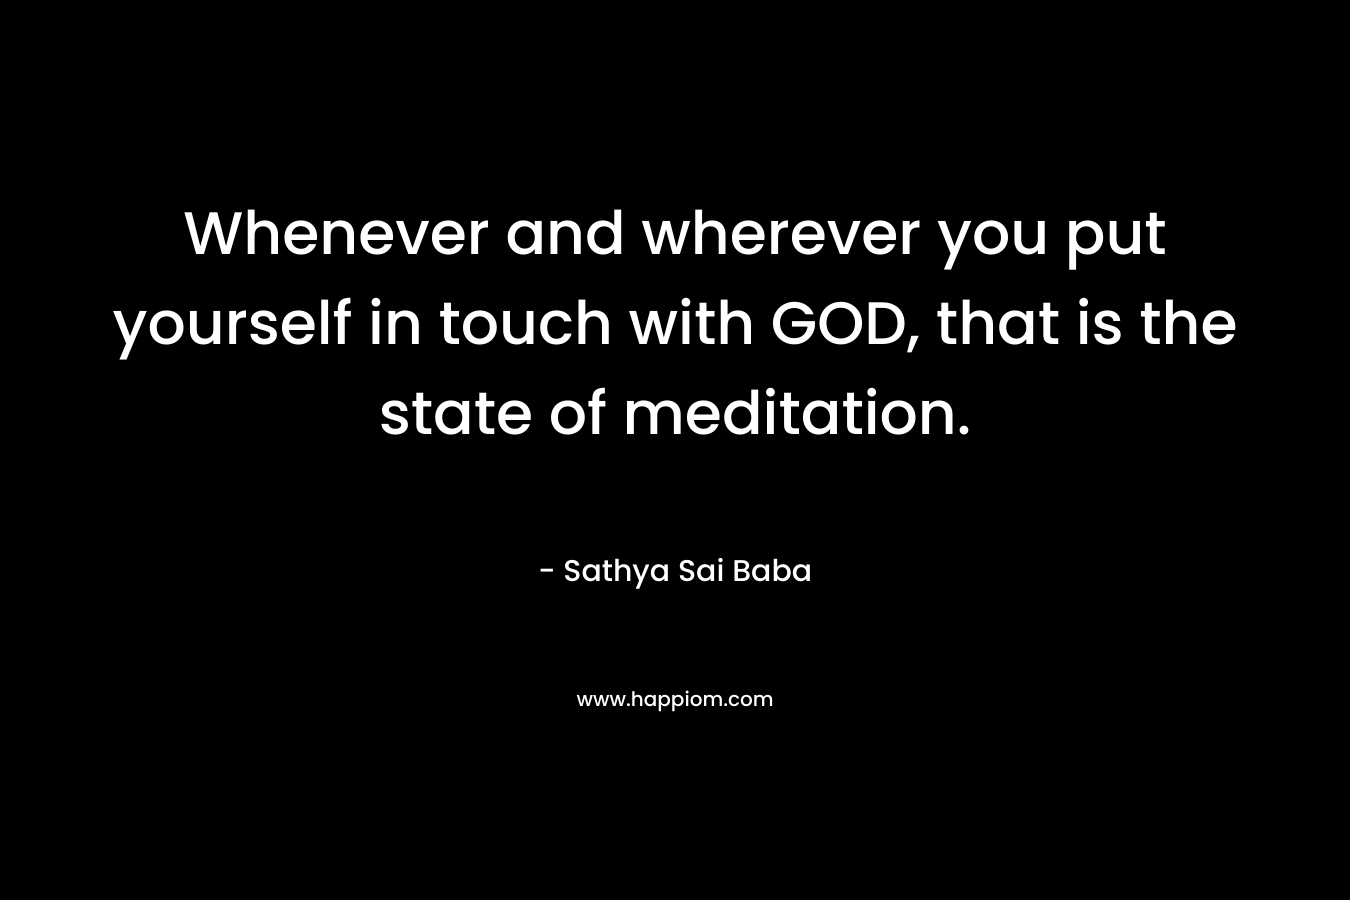 Whenever and wherever you put yourself in touch with GOD, that is the state of meditation.